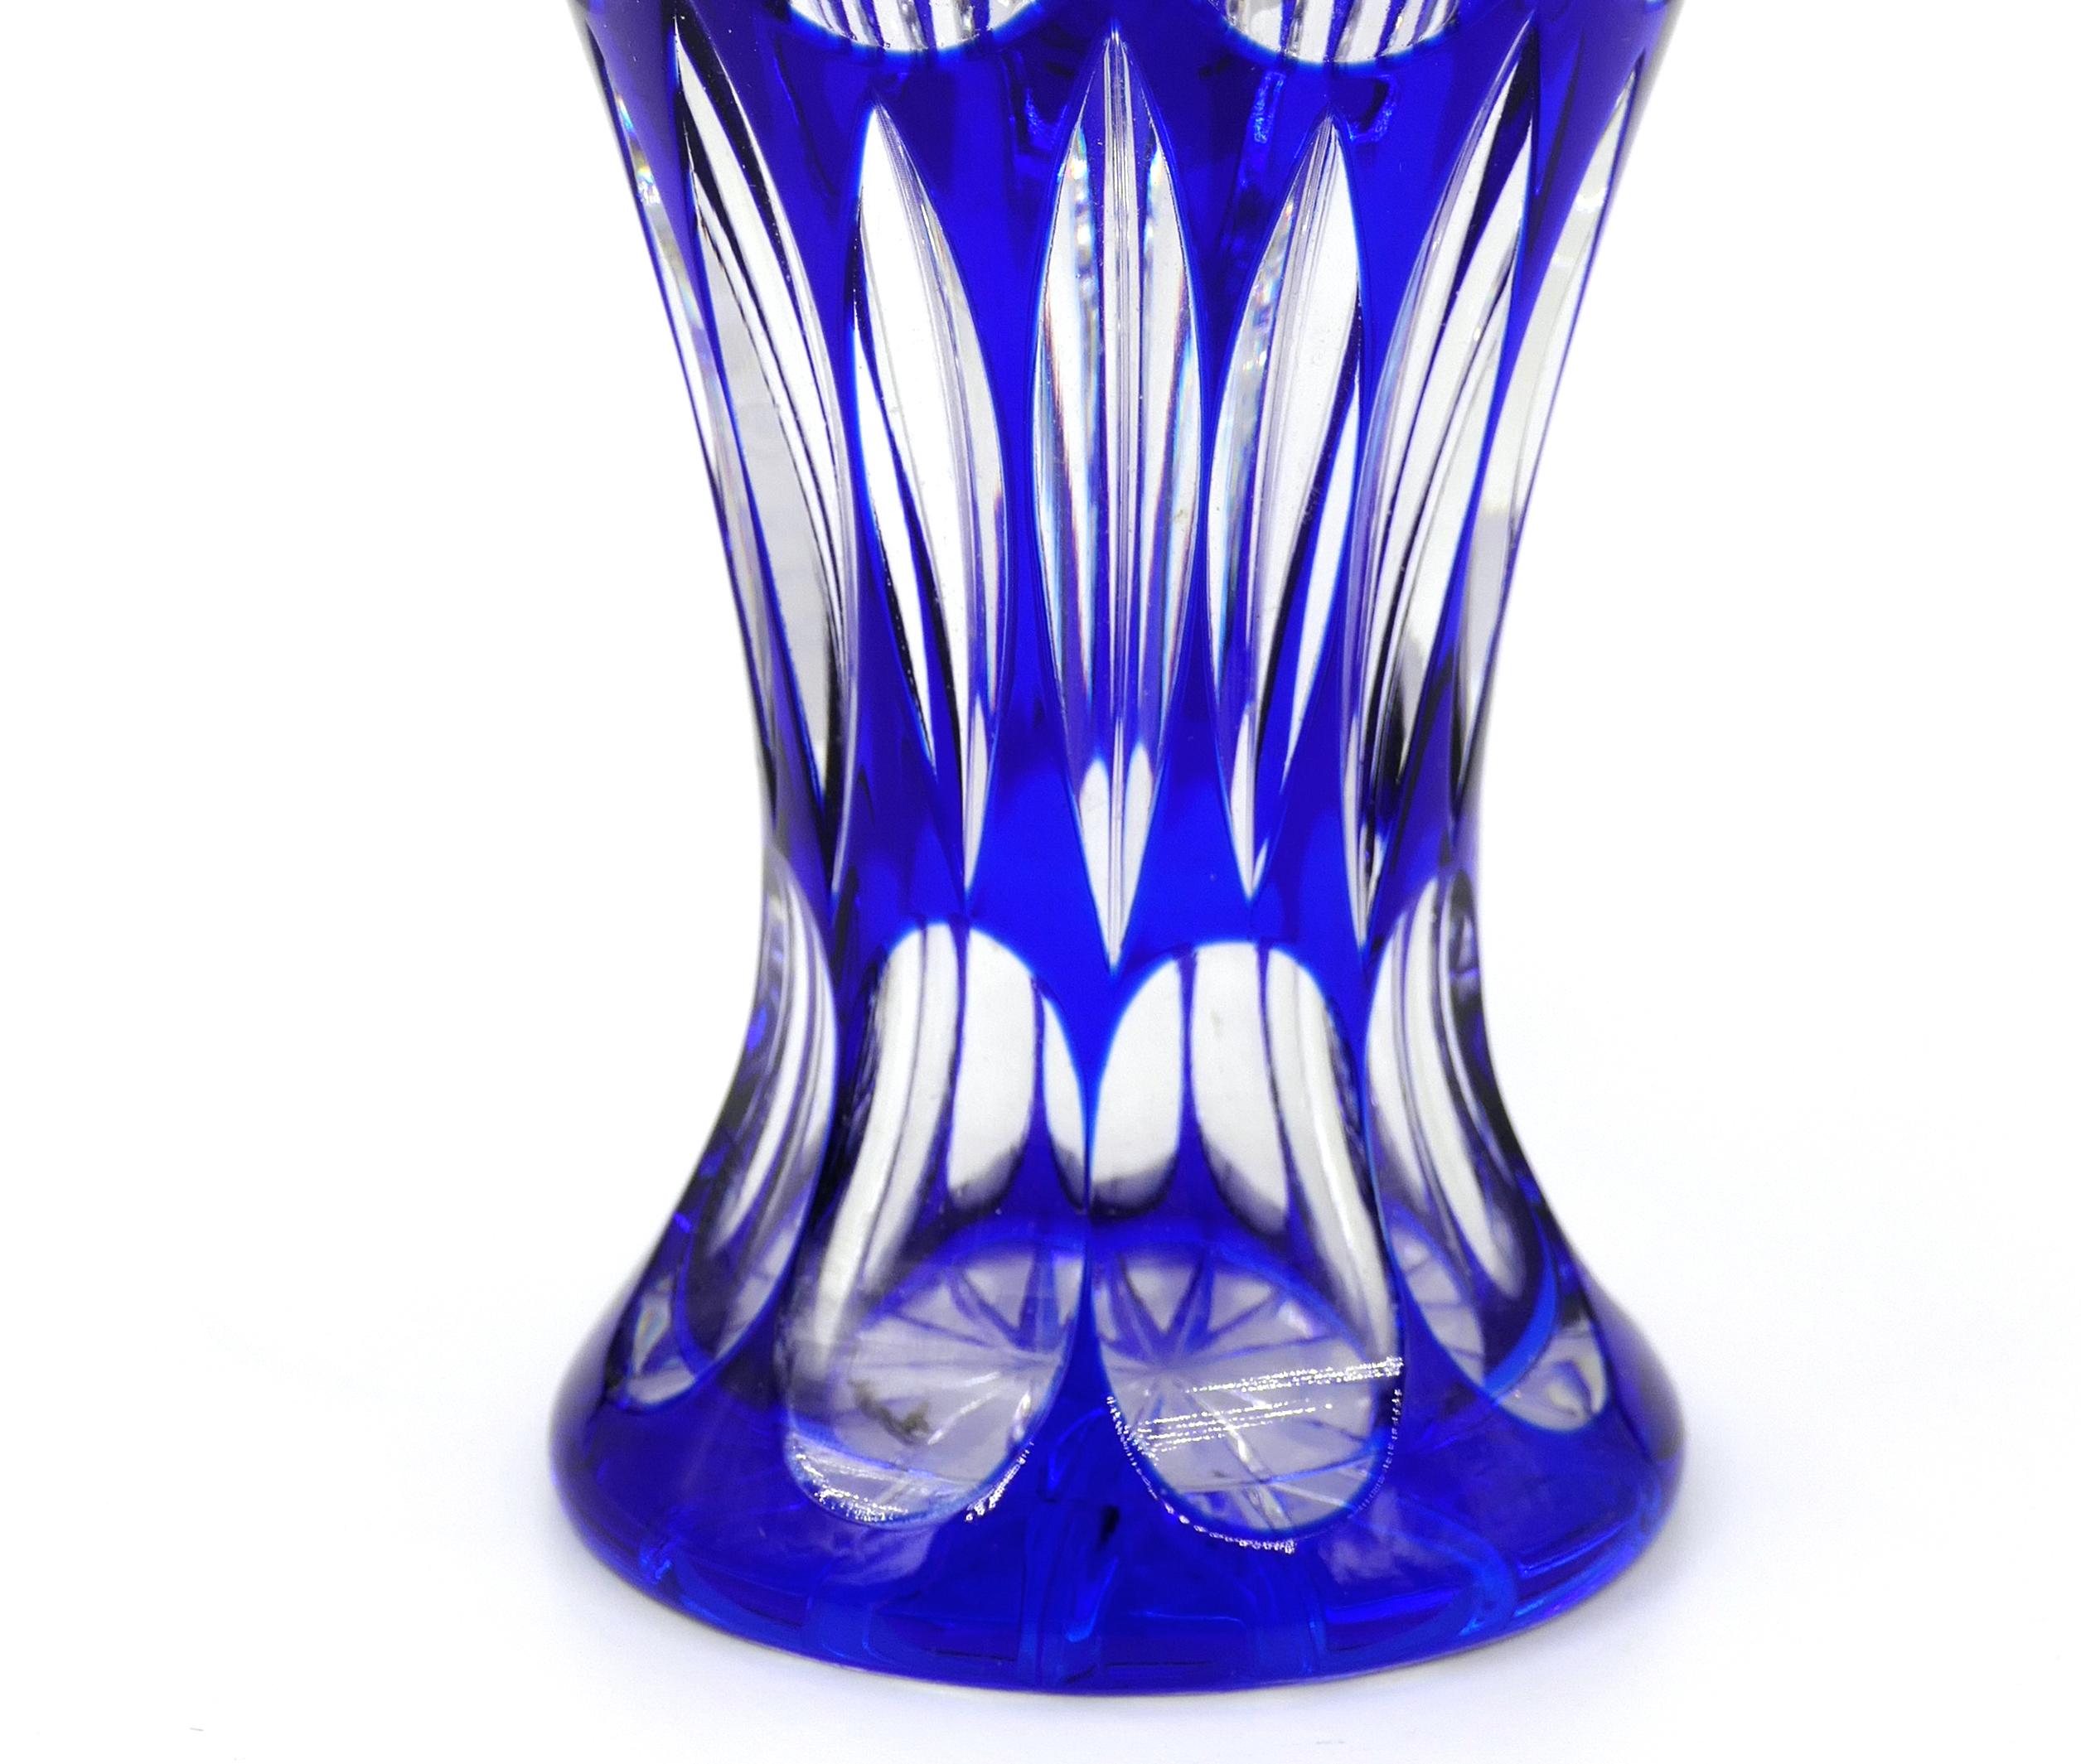 This is a crystal vase, produced in the second half of 20th century.

Probably it deals with a fine Bavarian crystal produced by Nachtmann.

In excellent condition, this precious cobalt blue crystal vase with a transparent geometric motive